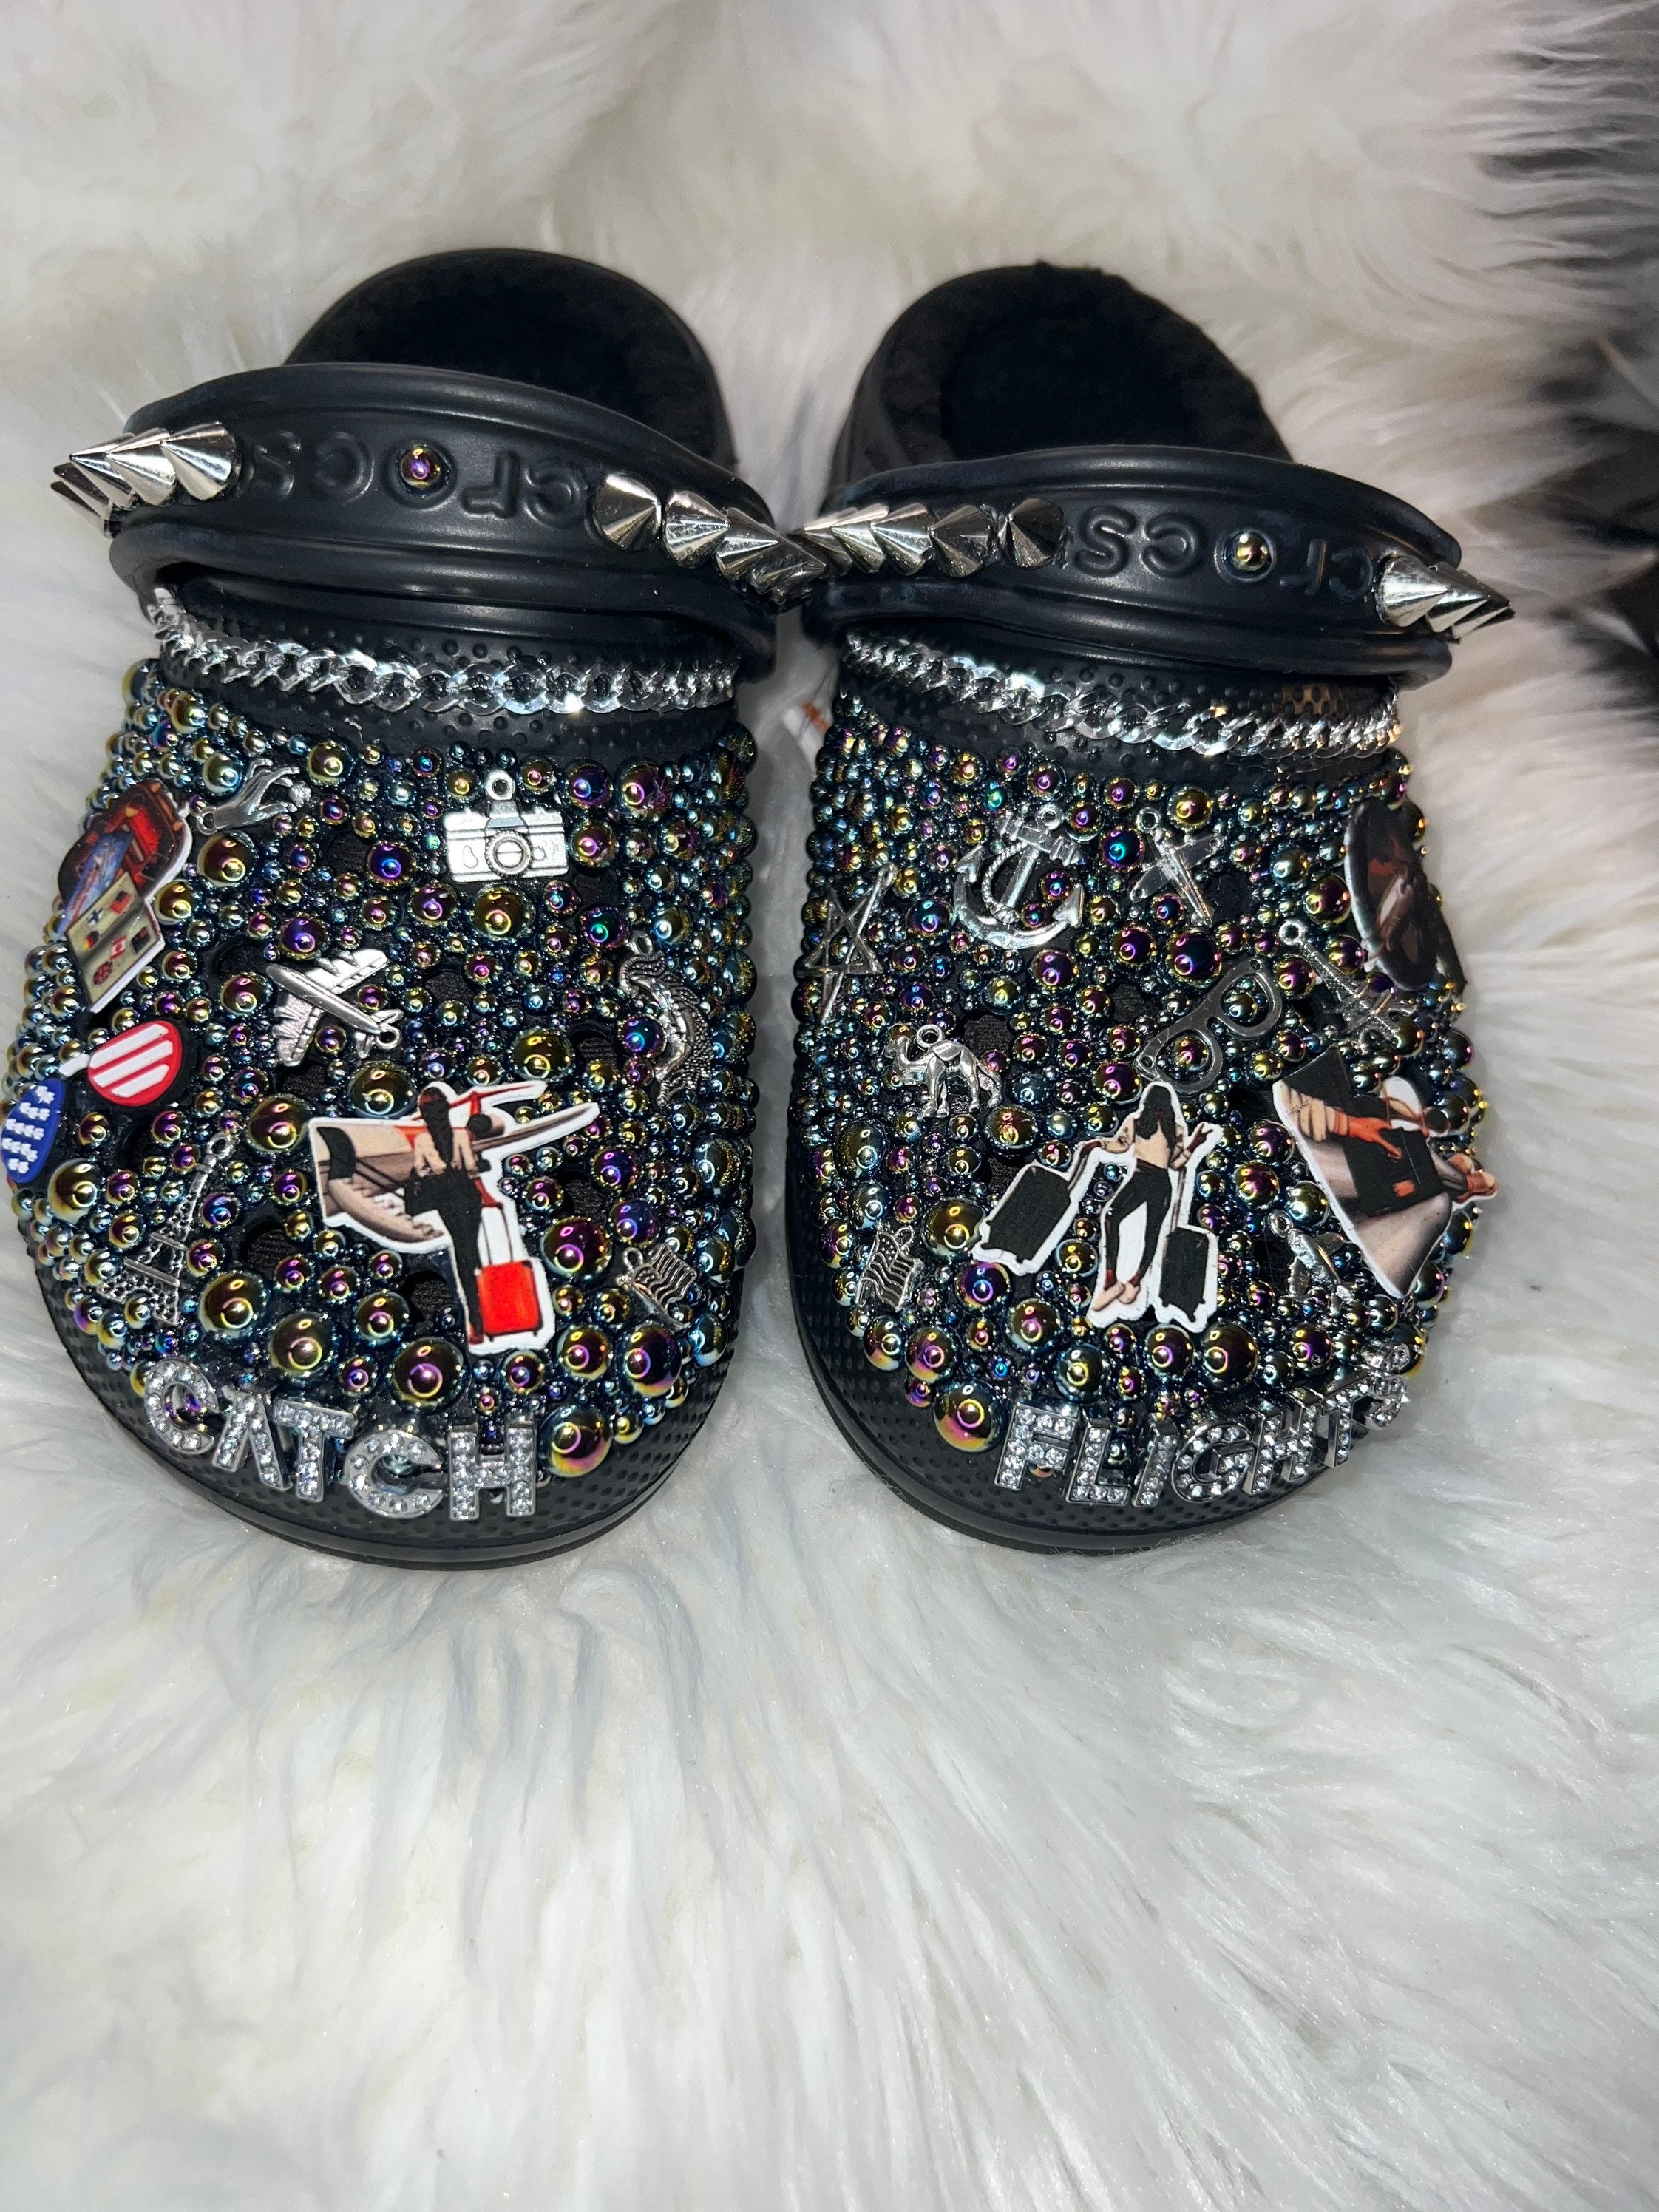 Winterized black crocs with fur and bling charms, size 7